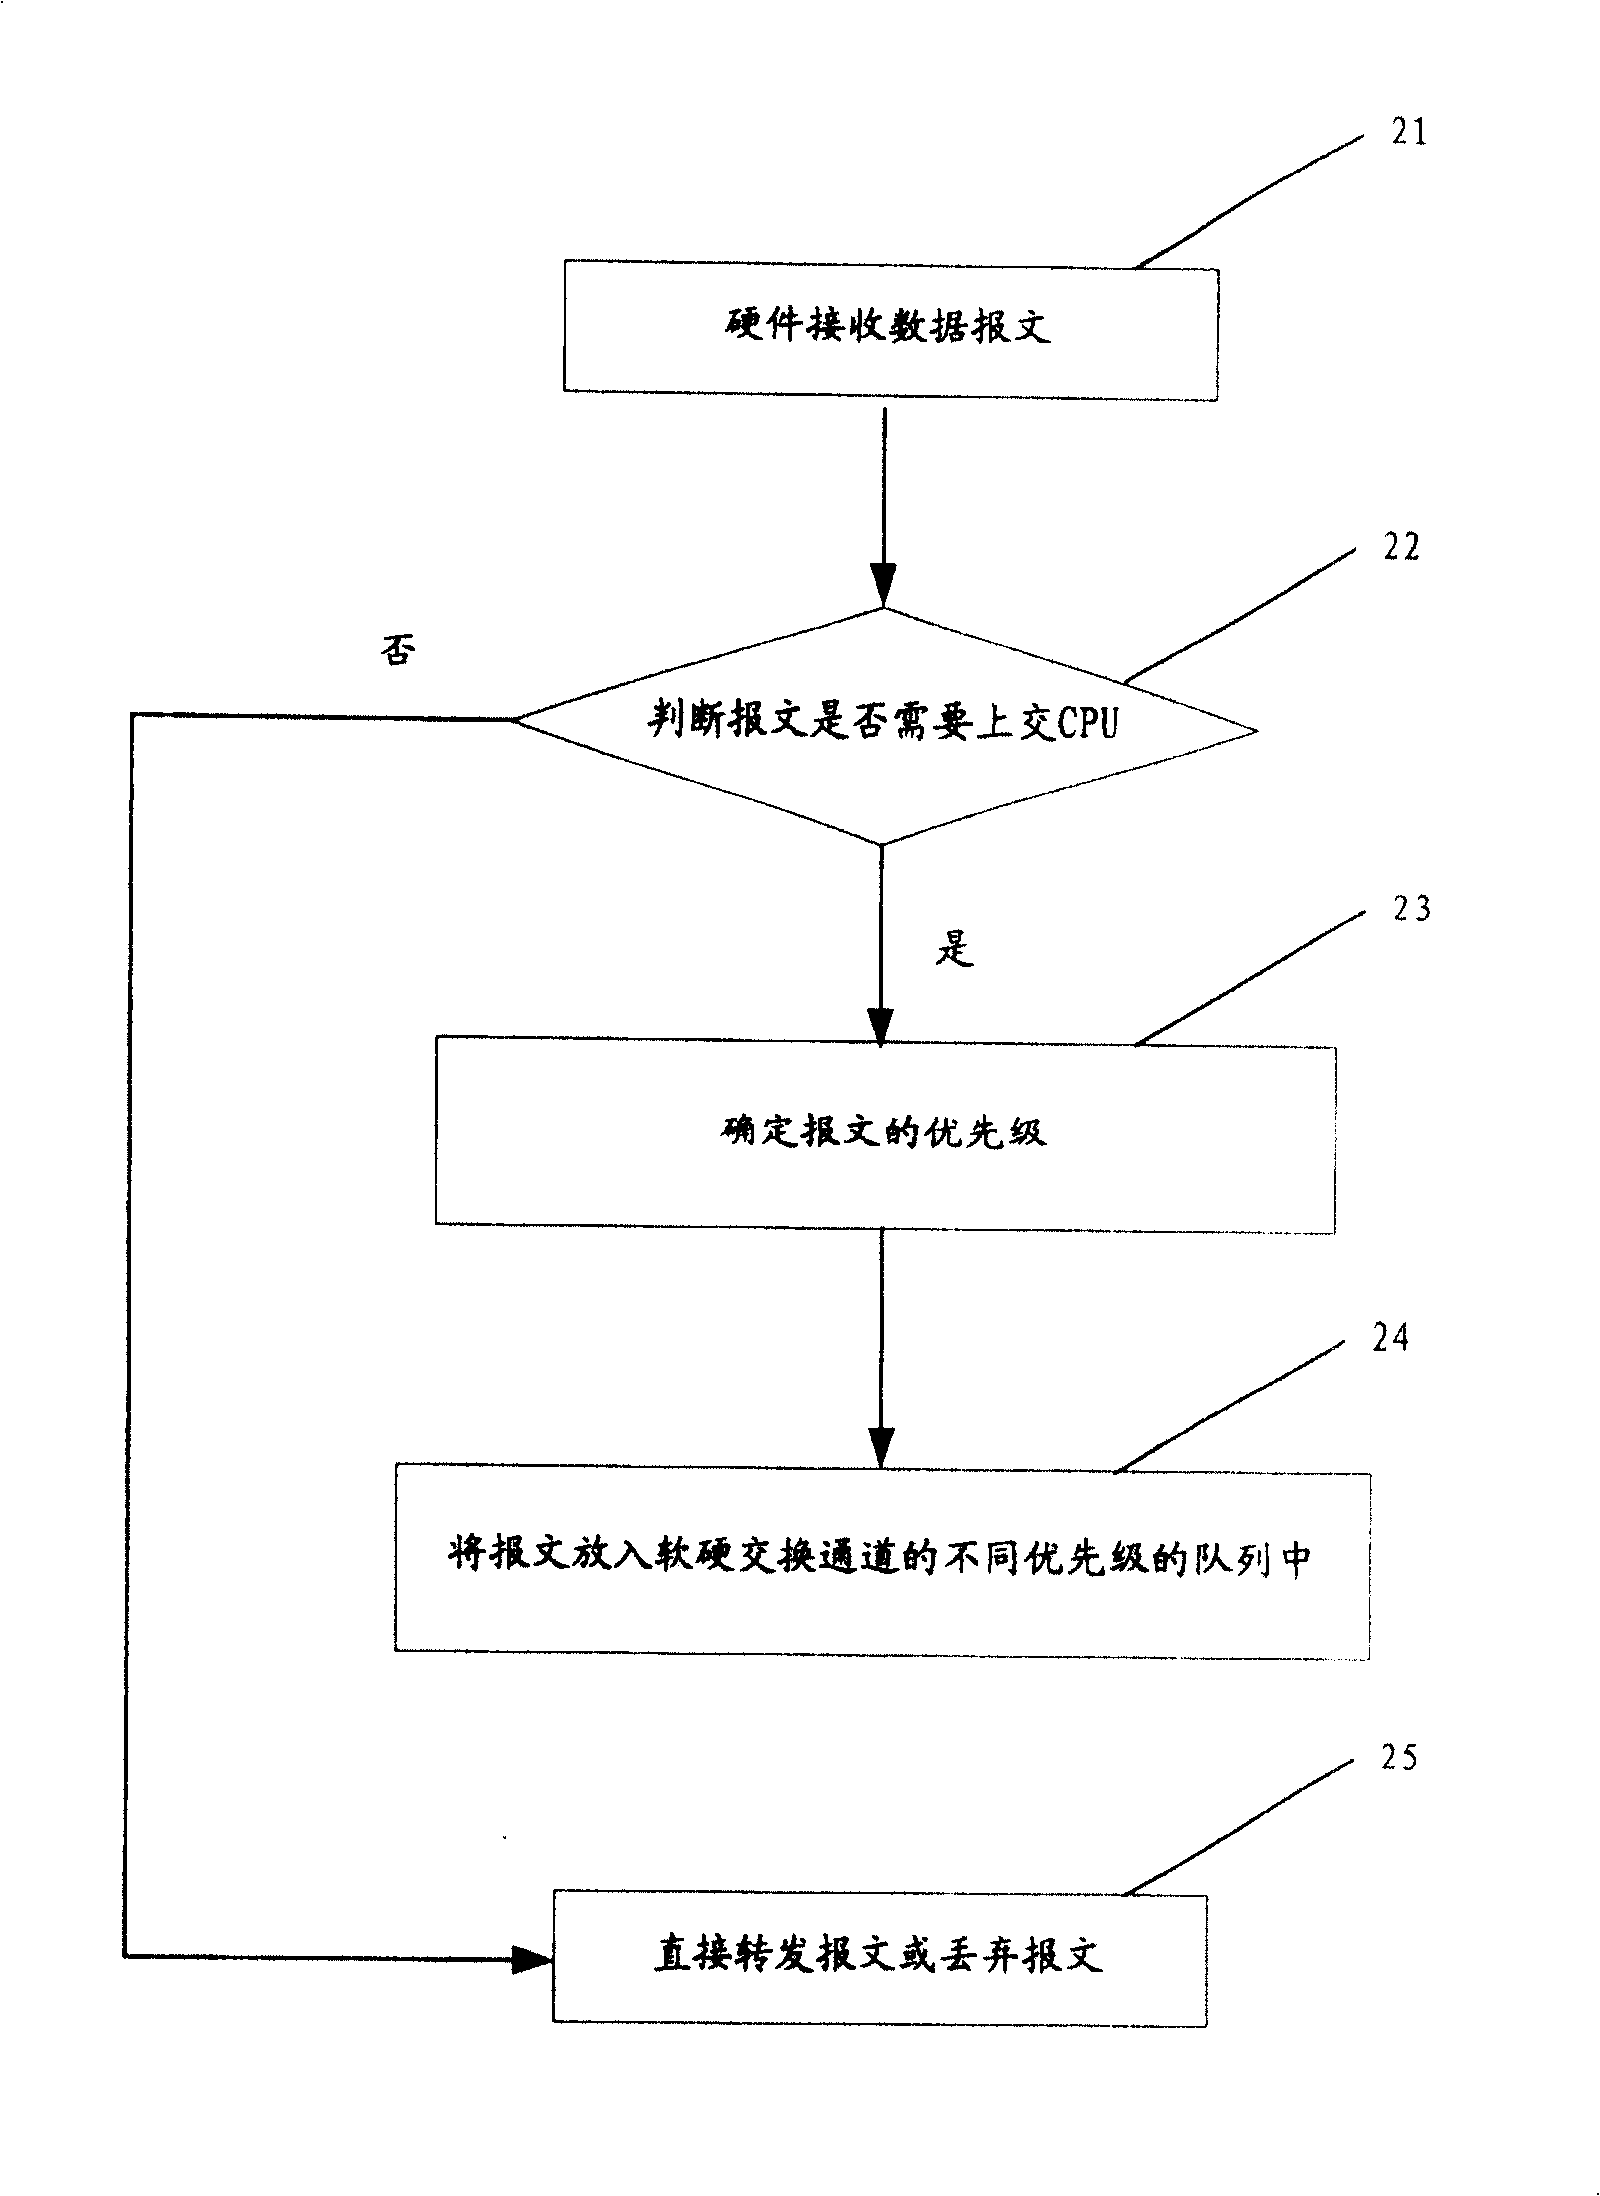 Method for raising network security via message processing